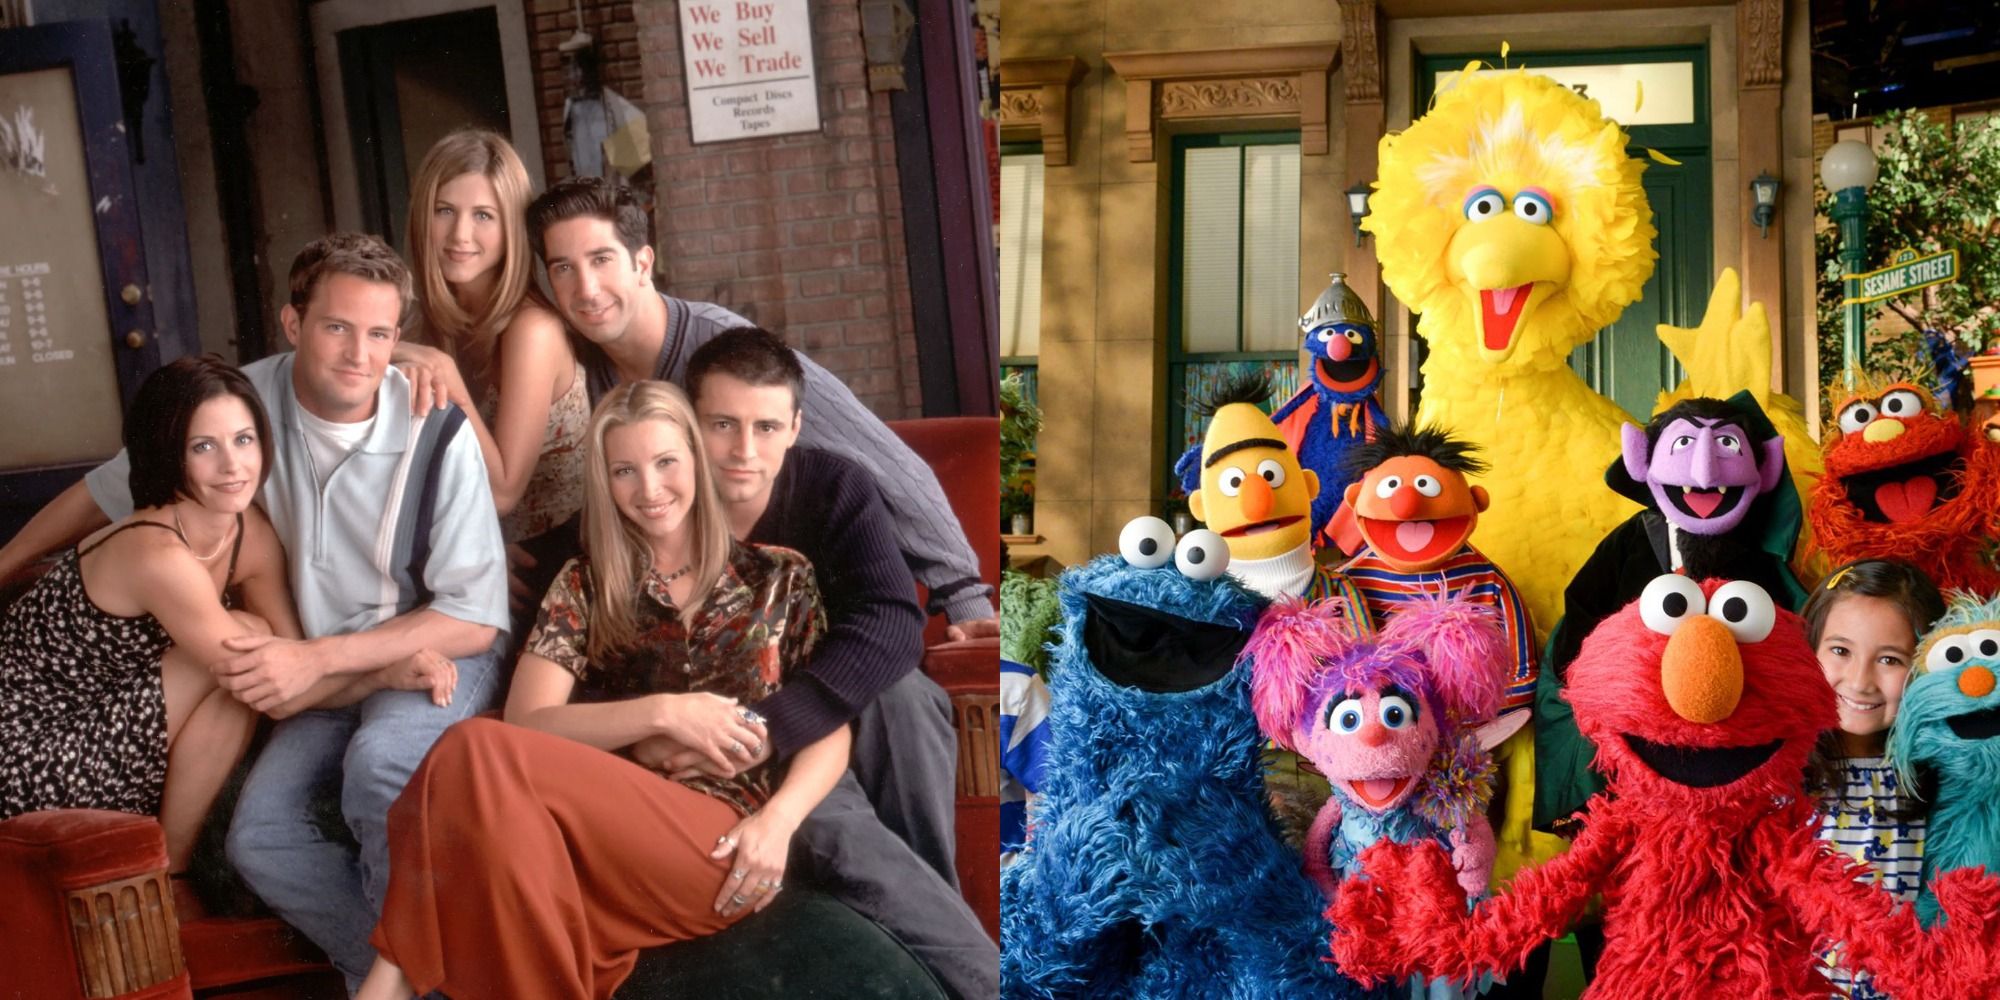 The cast of Friends and the cast of Sesame Street